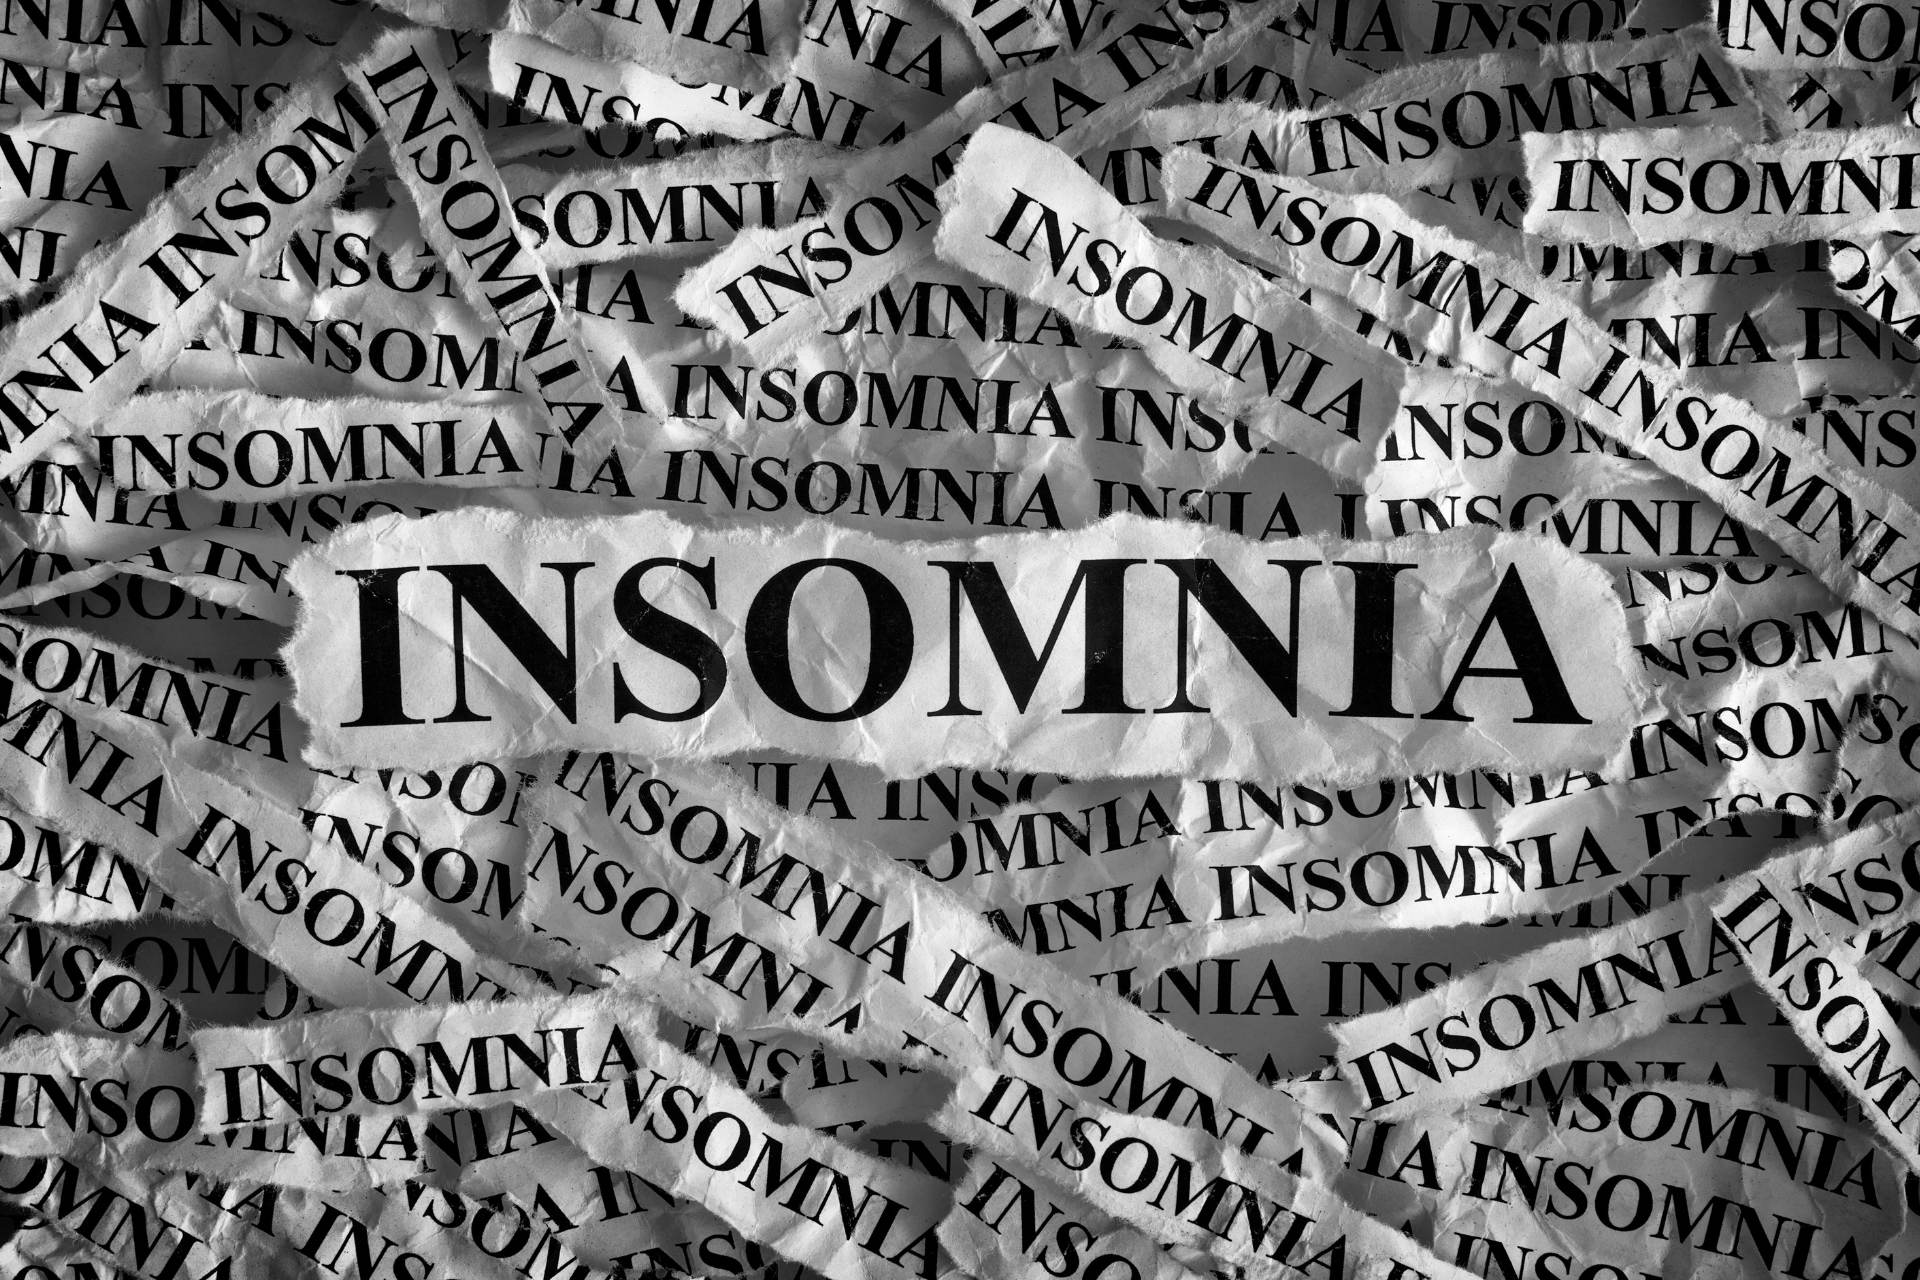 Everything you have to know about Insomnia - Causes, Symptoms, Diagnosis and Treatment by Dr. Wei Cui ShutEye